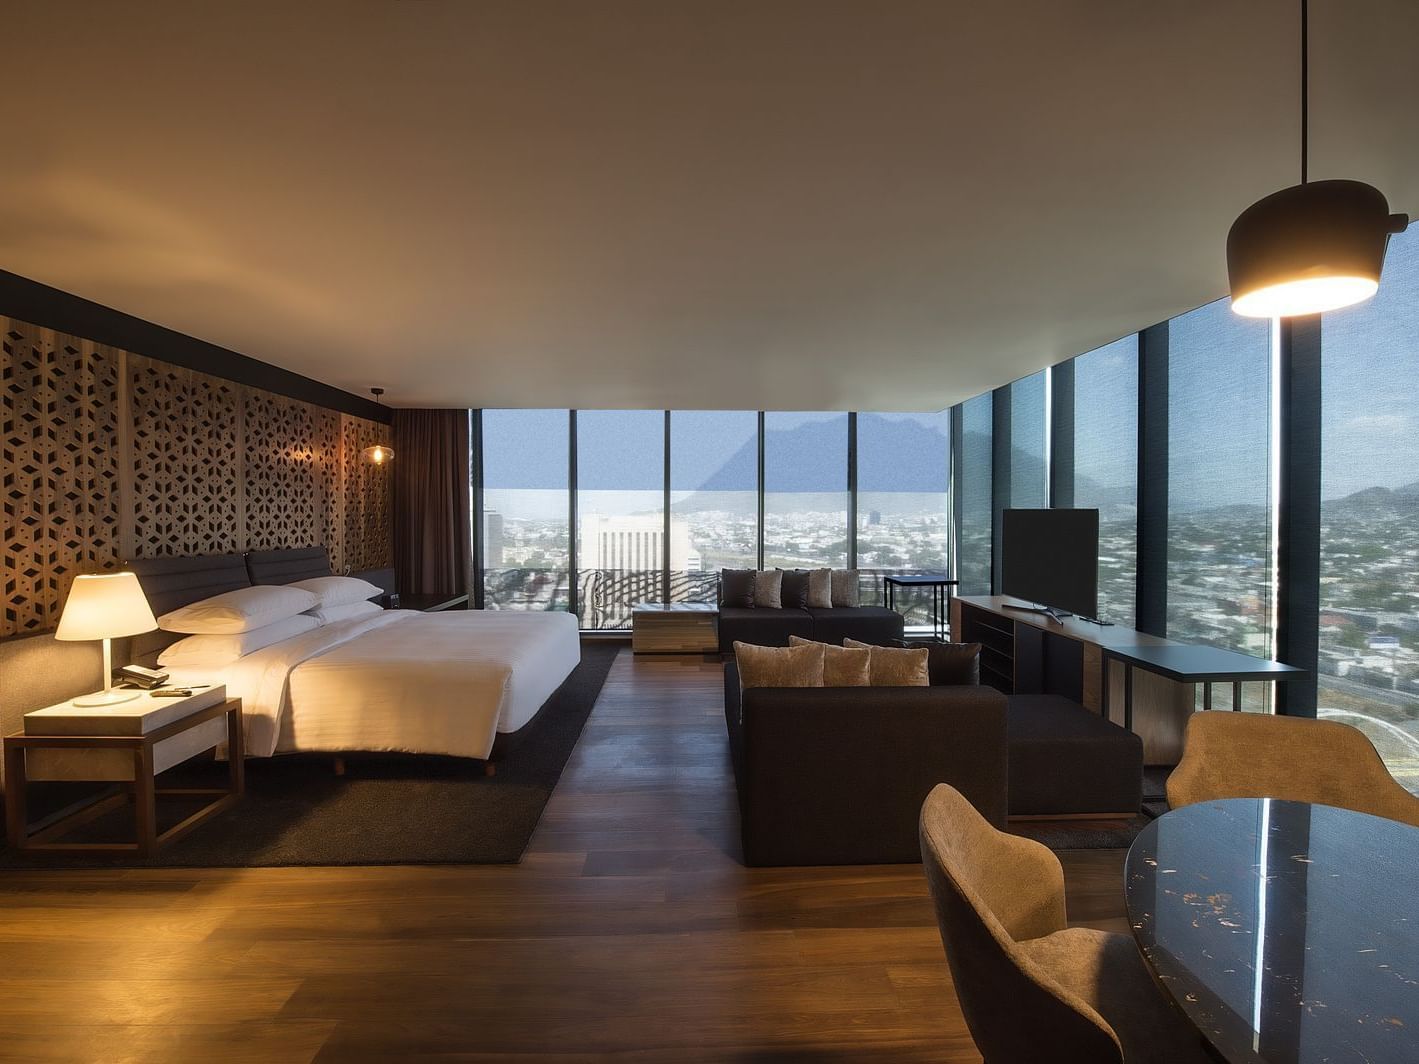 King bed & sofas in Master suite with a city view, La Colección